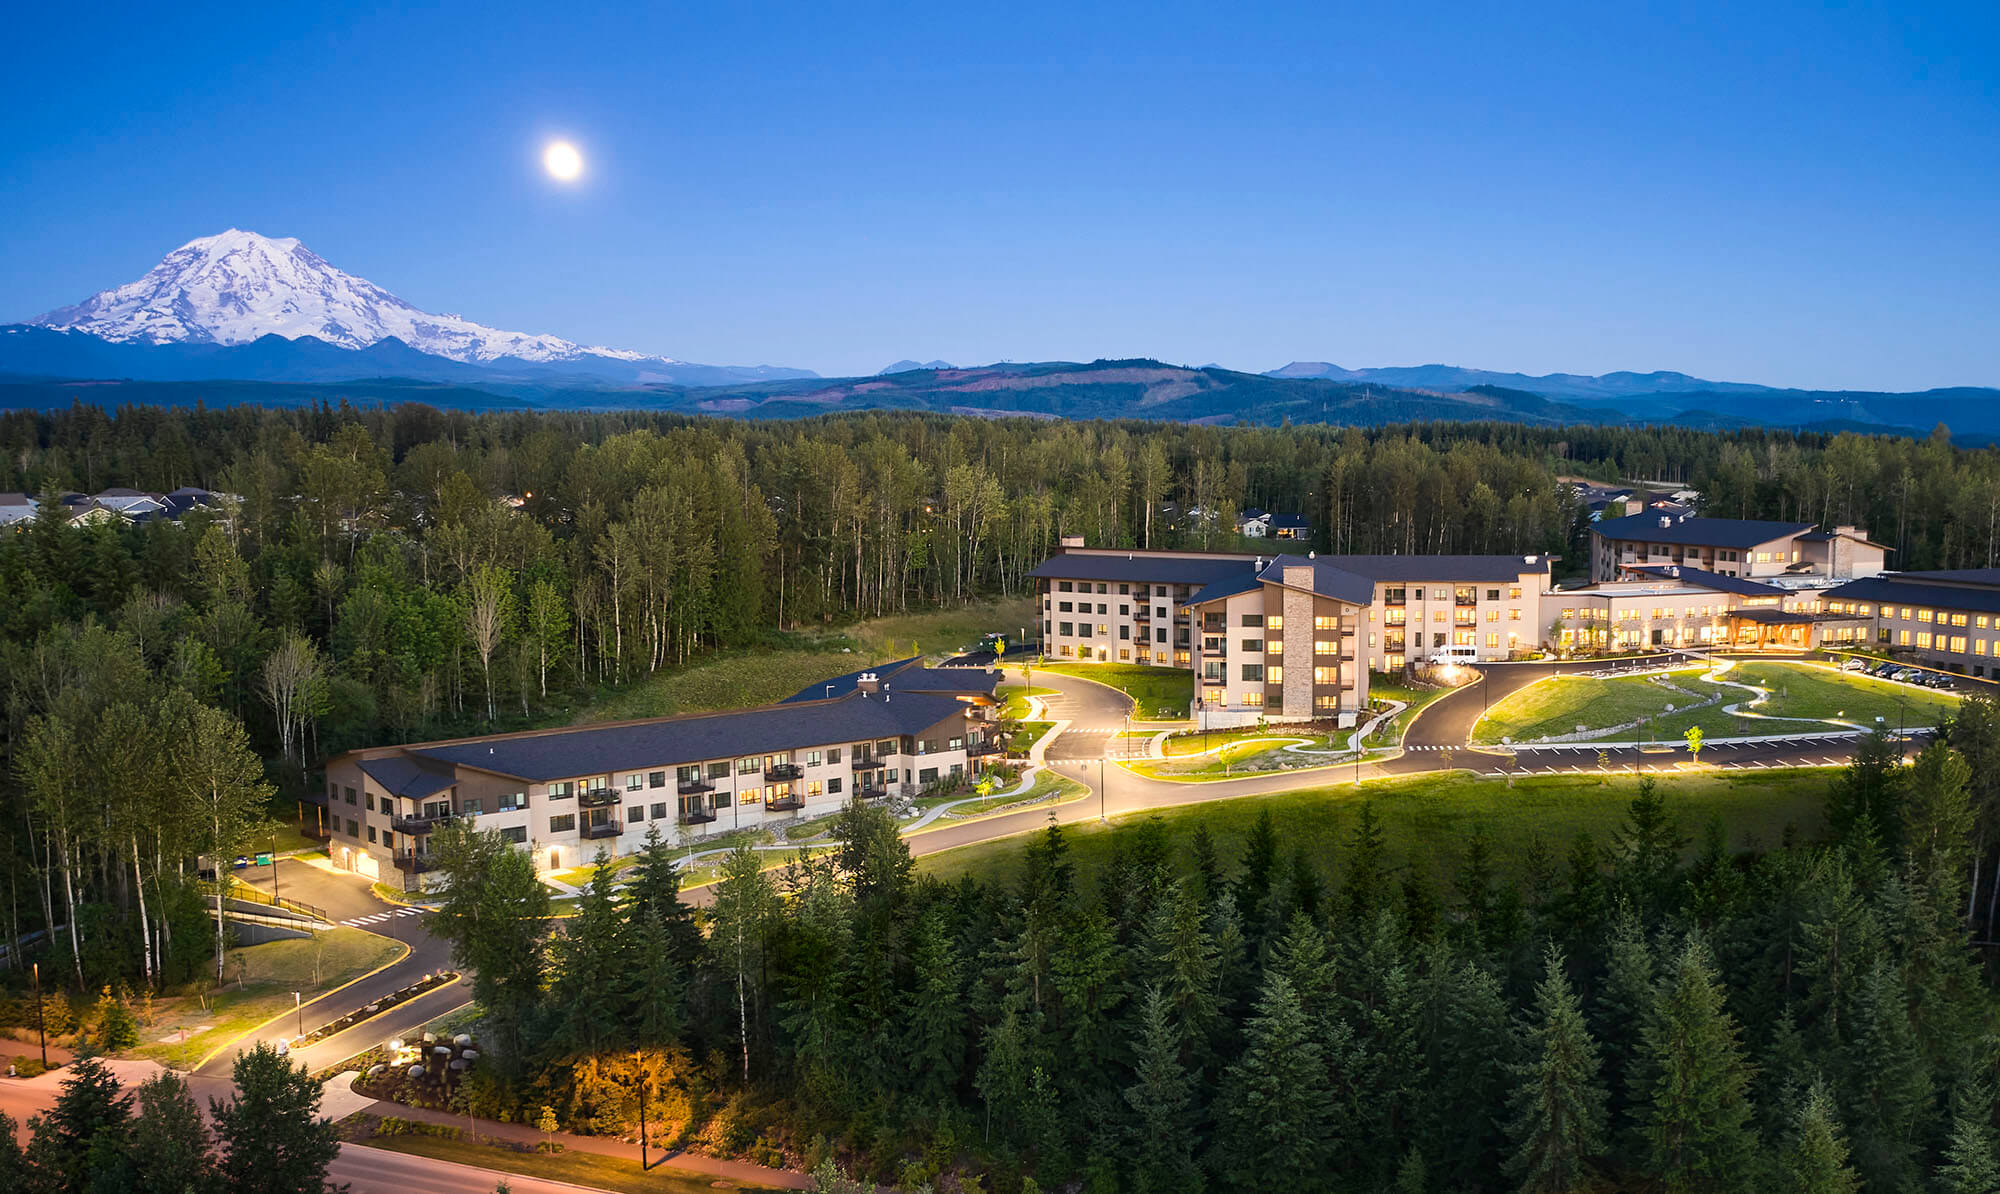 Group of buildings surrounded by pine trees with moon and Mount Rainier in the background